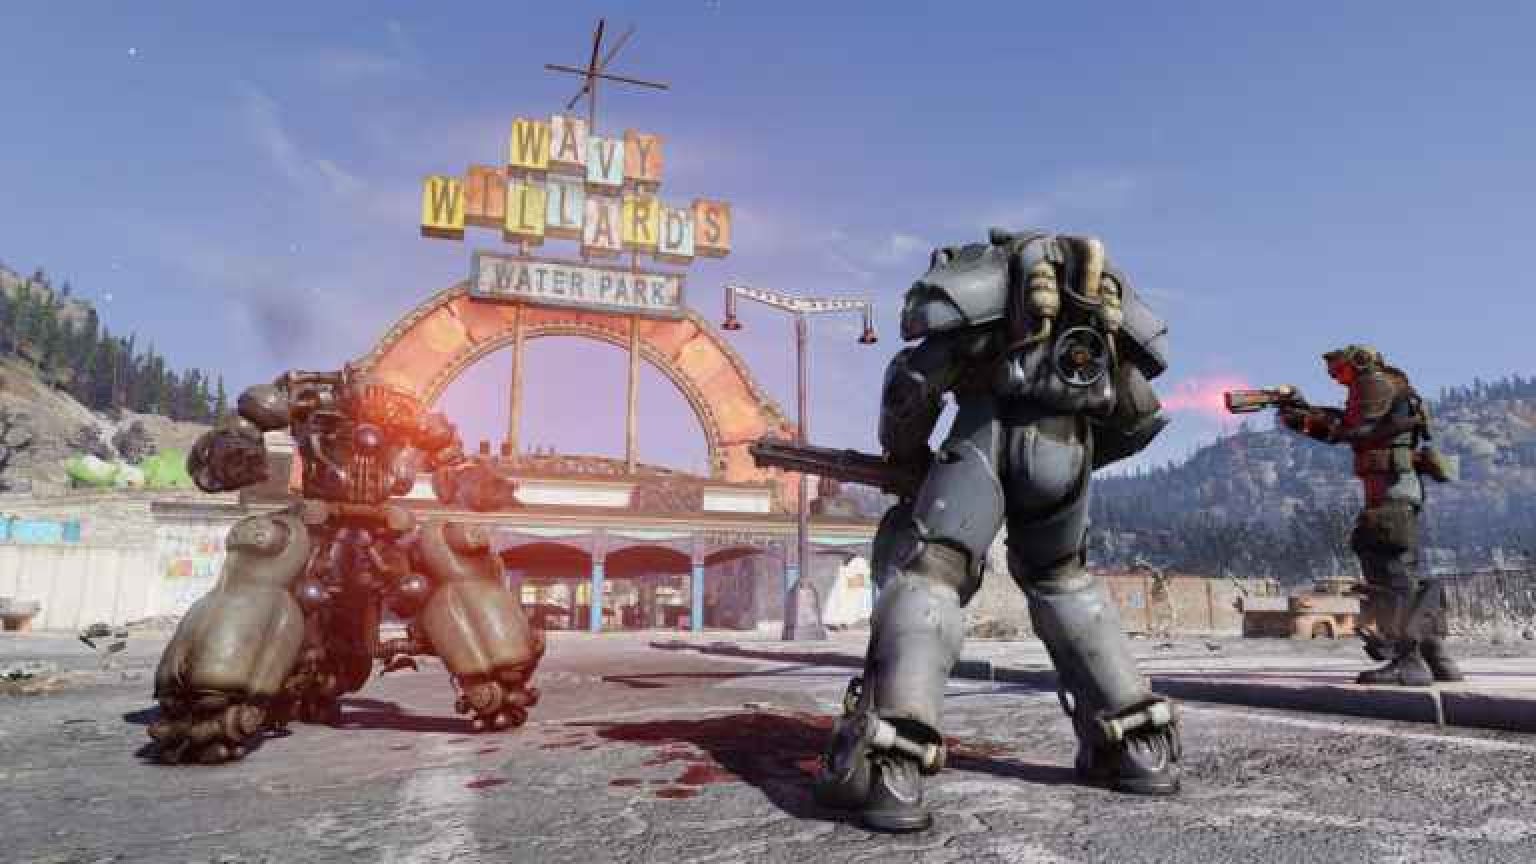 fallout 76 download size